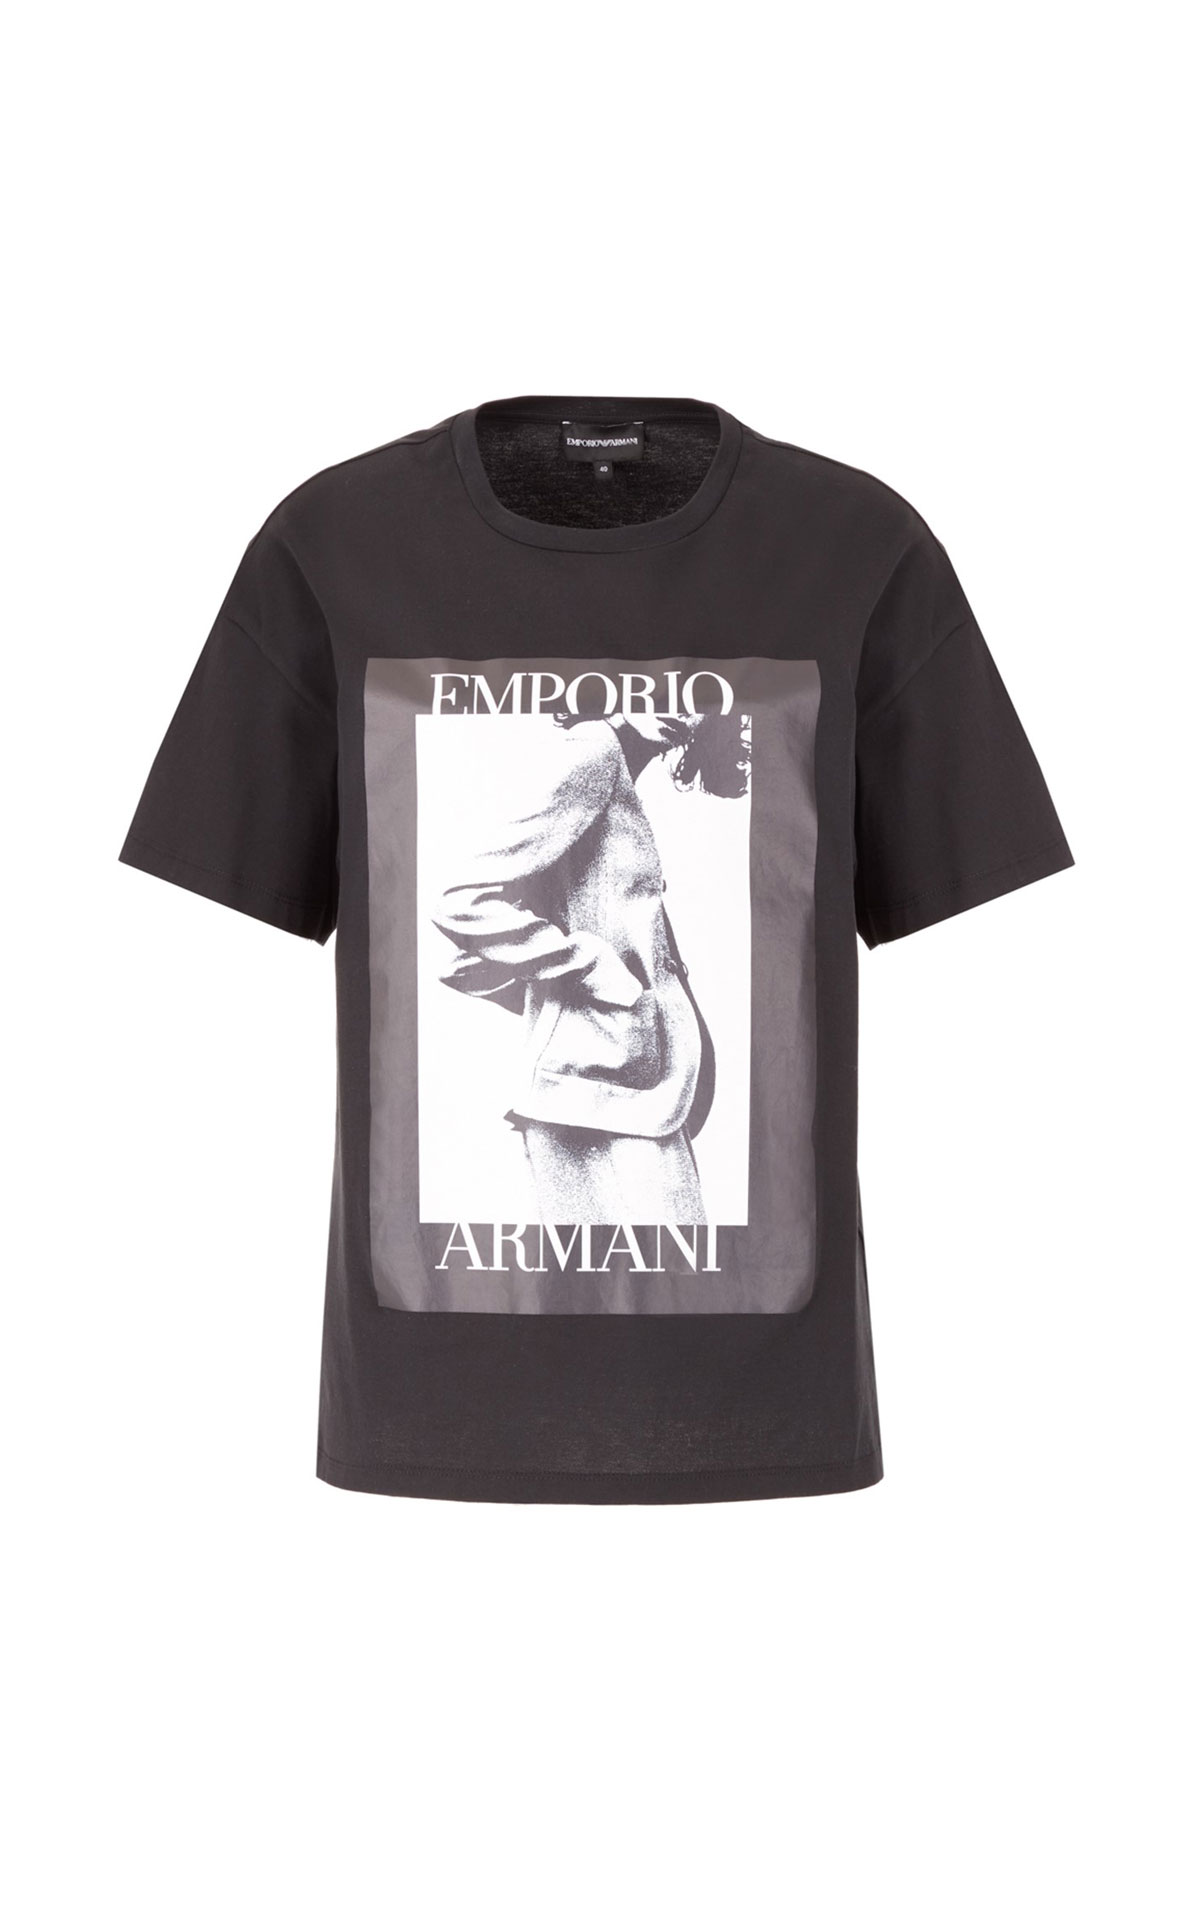 Armani Ladies t-shirt from Bicester Village